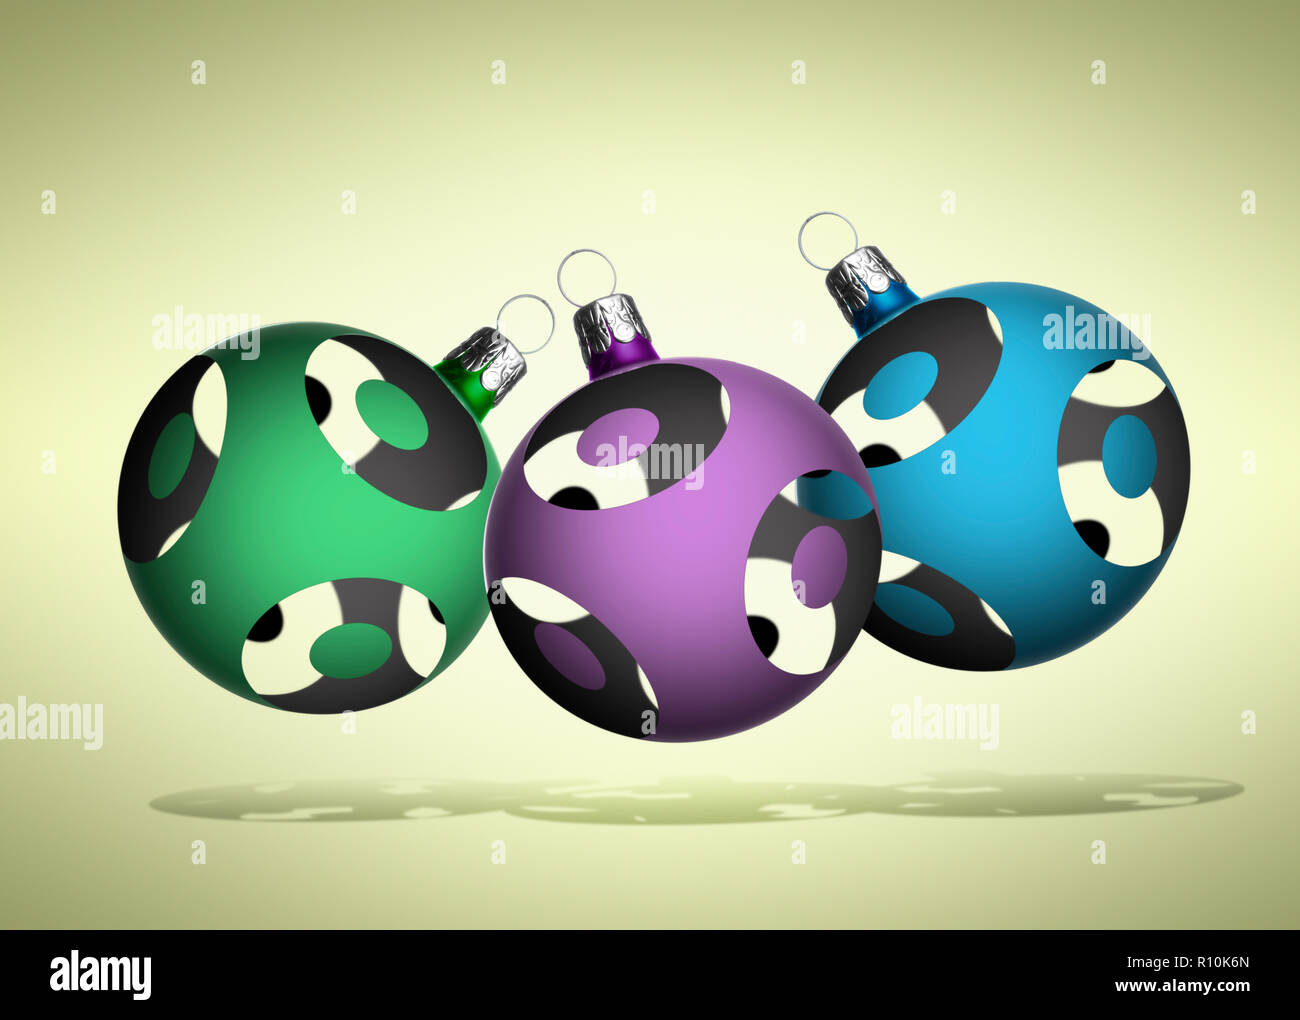 Close up of three Christmas baubles floating against a plain background Stock Photo